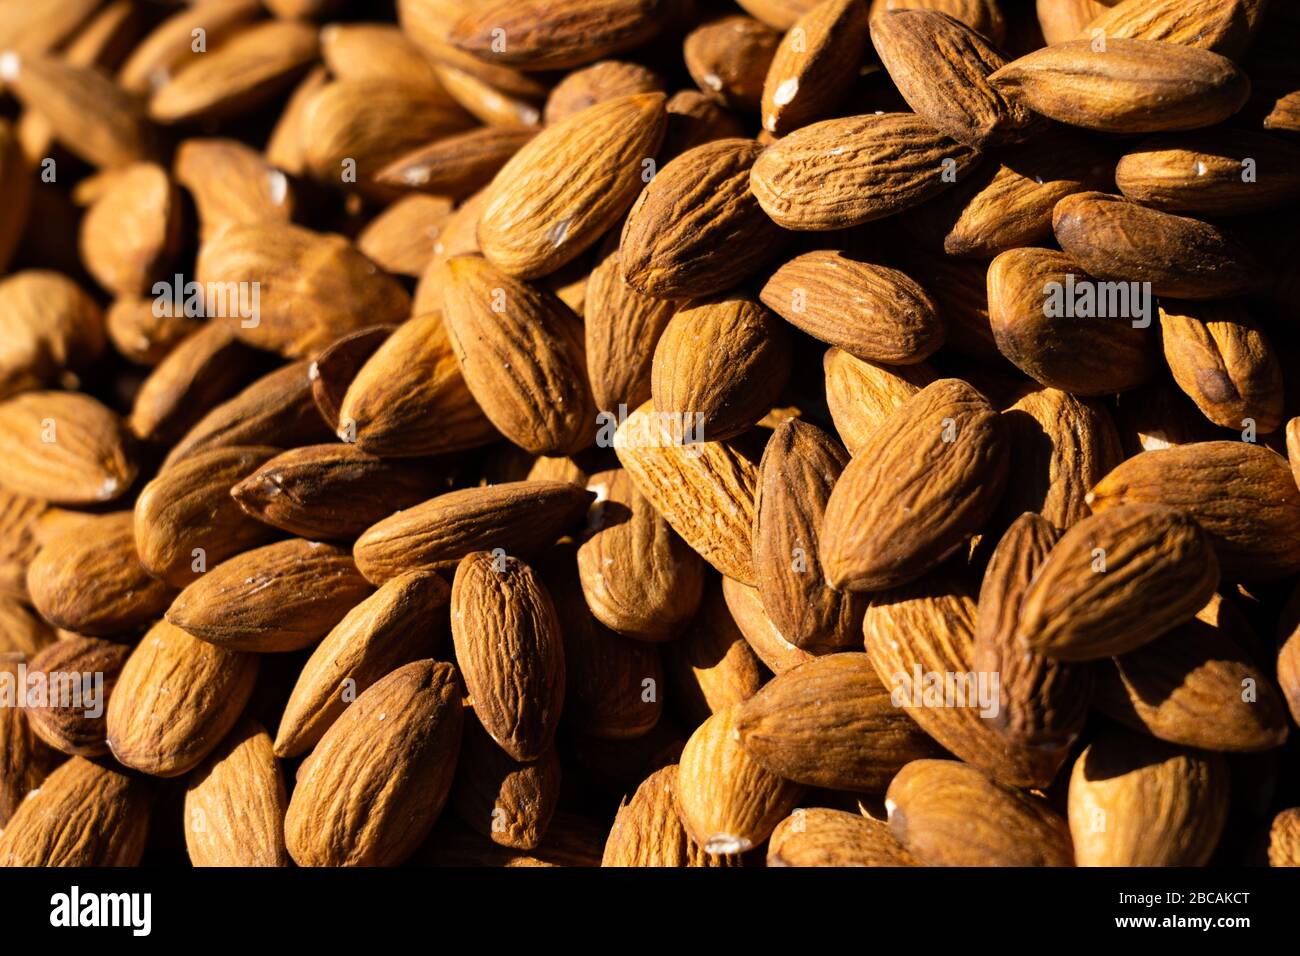 Almonds macro. Almonds background. Almond nuts. Organic texture of almonds. View from above Stock Photo